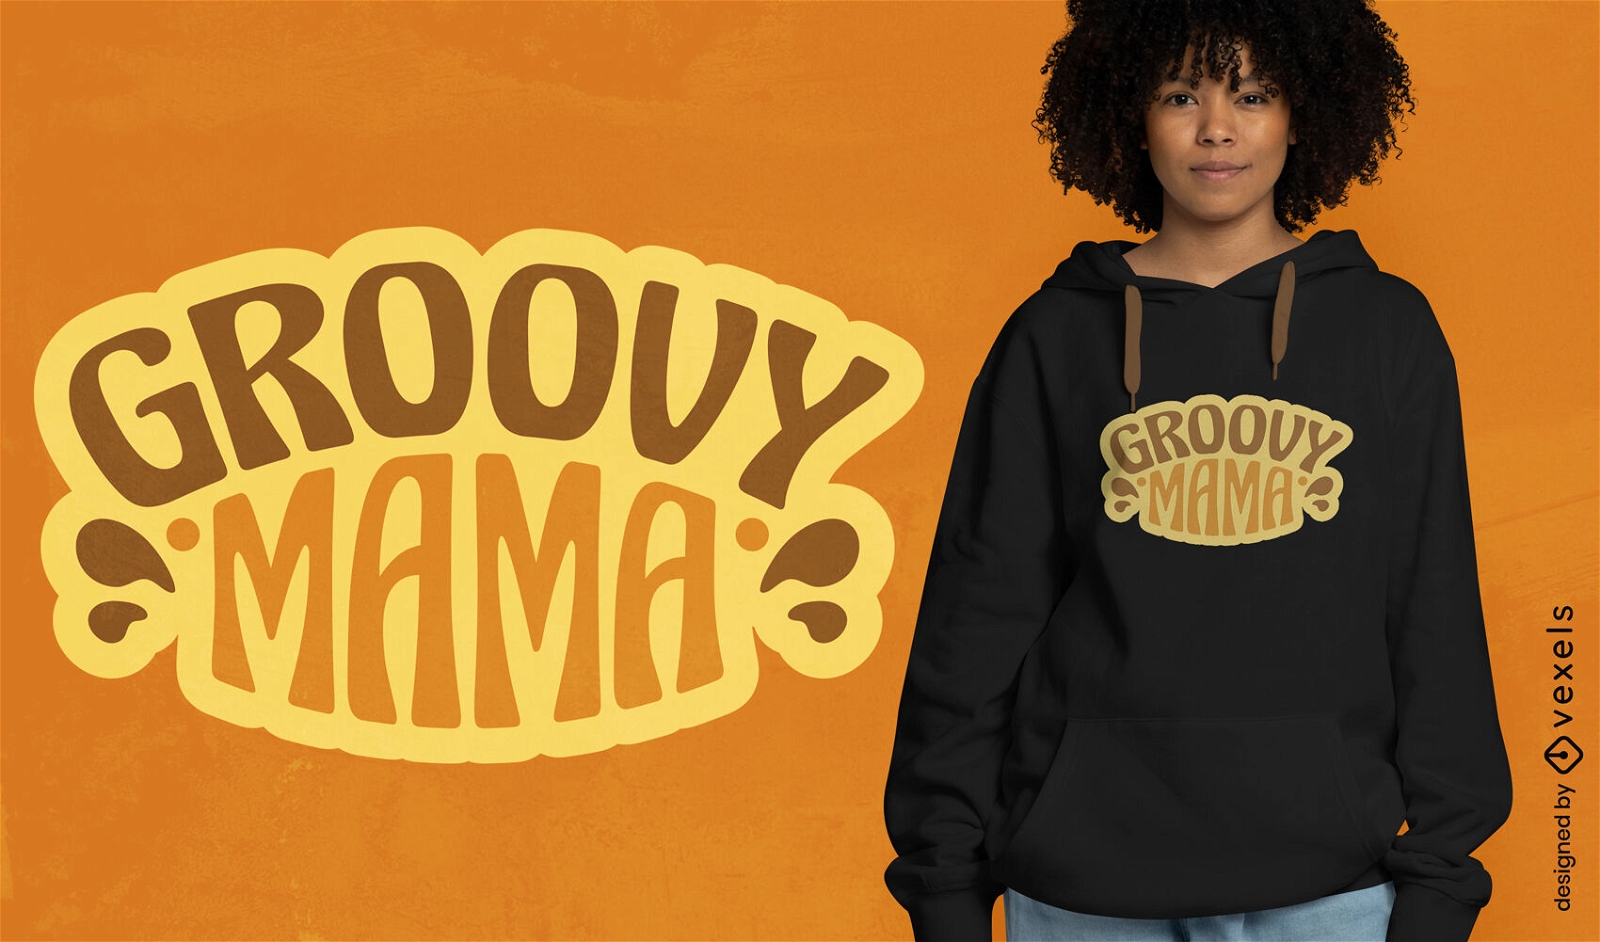 Groovy mama quote t-shirt design